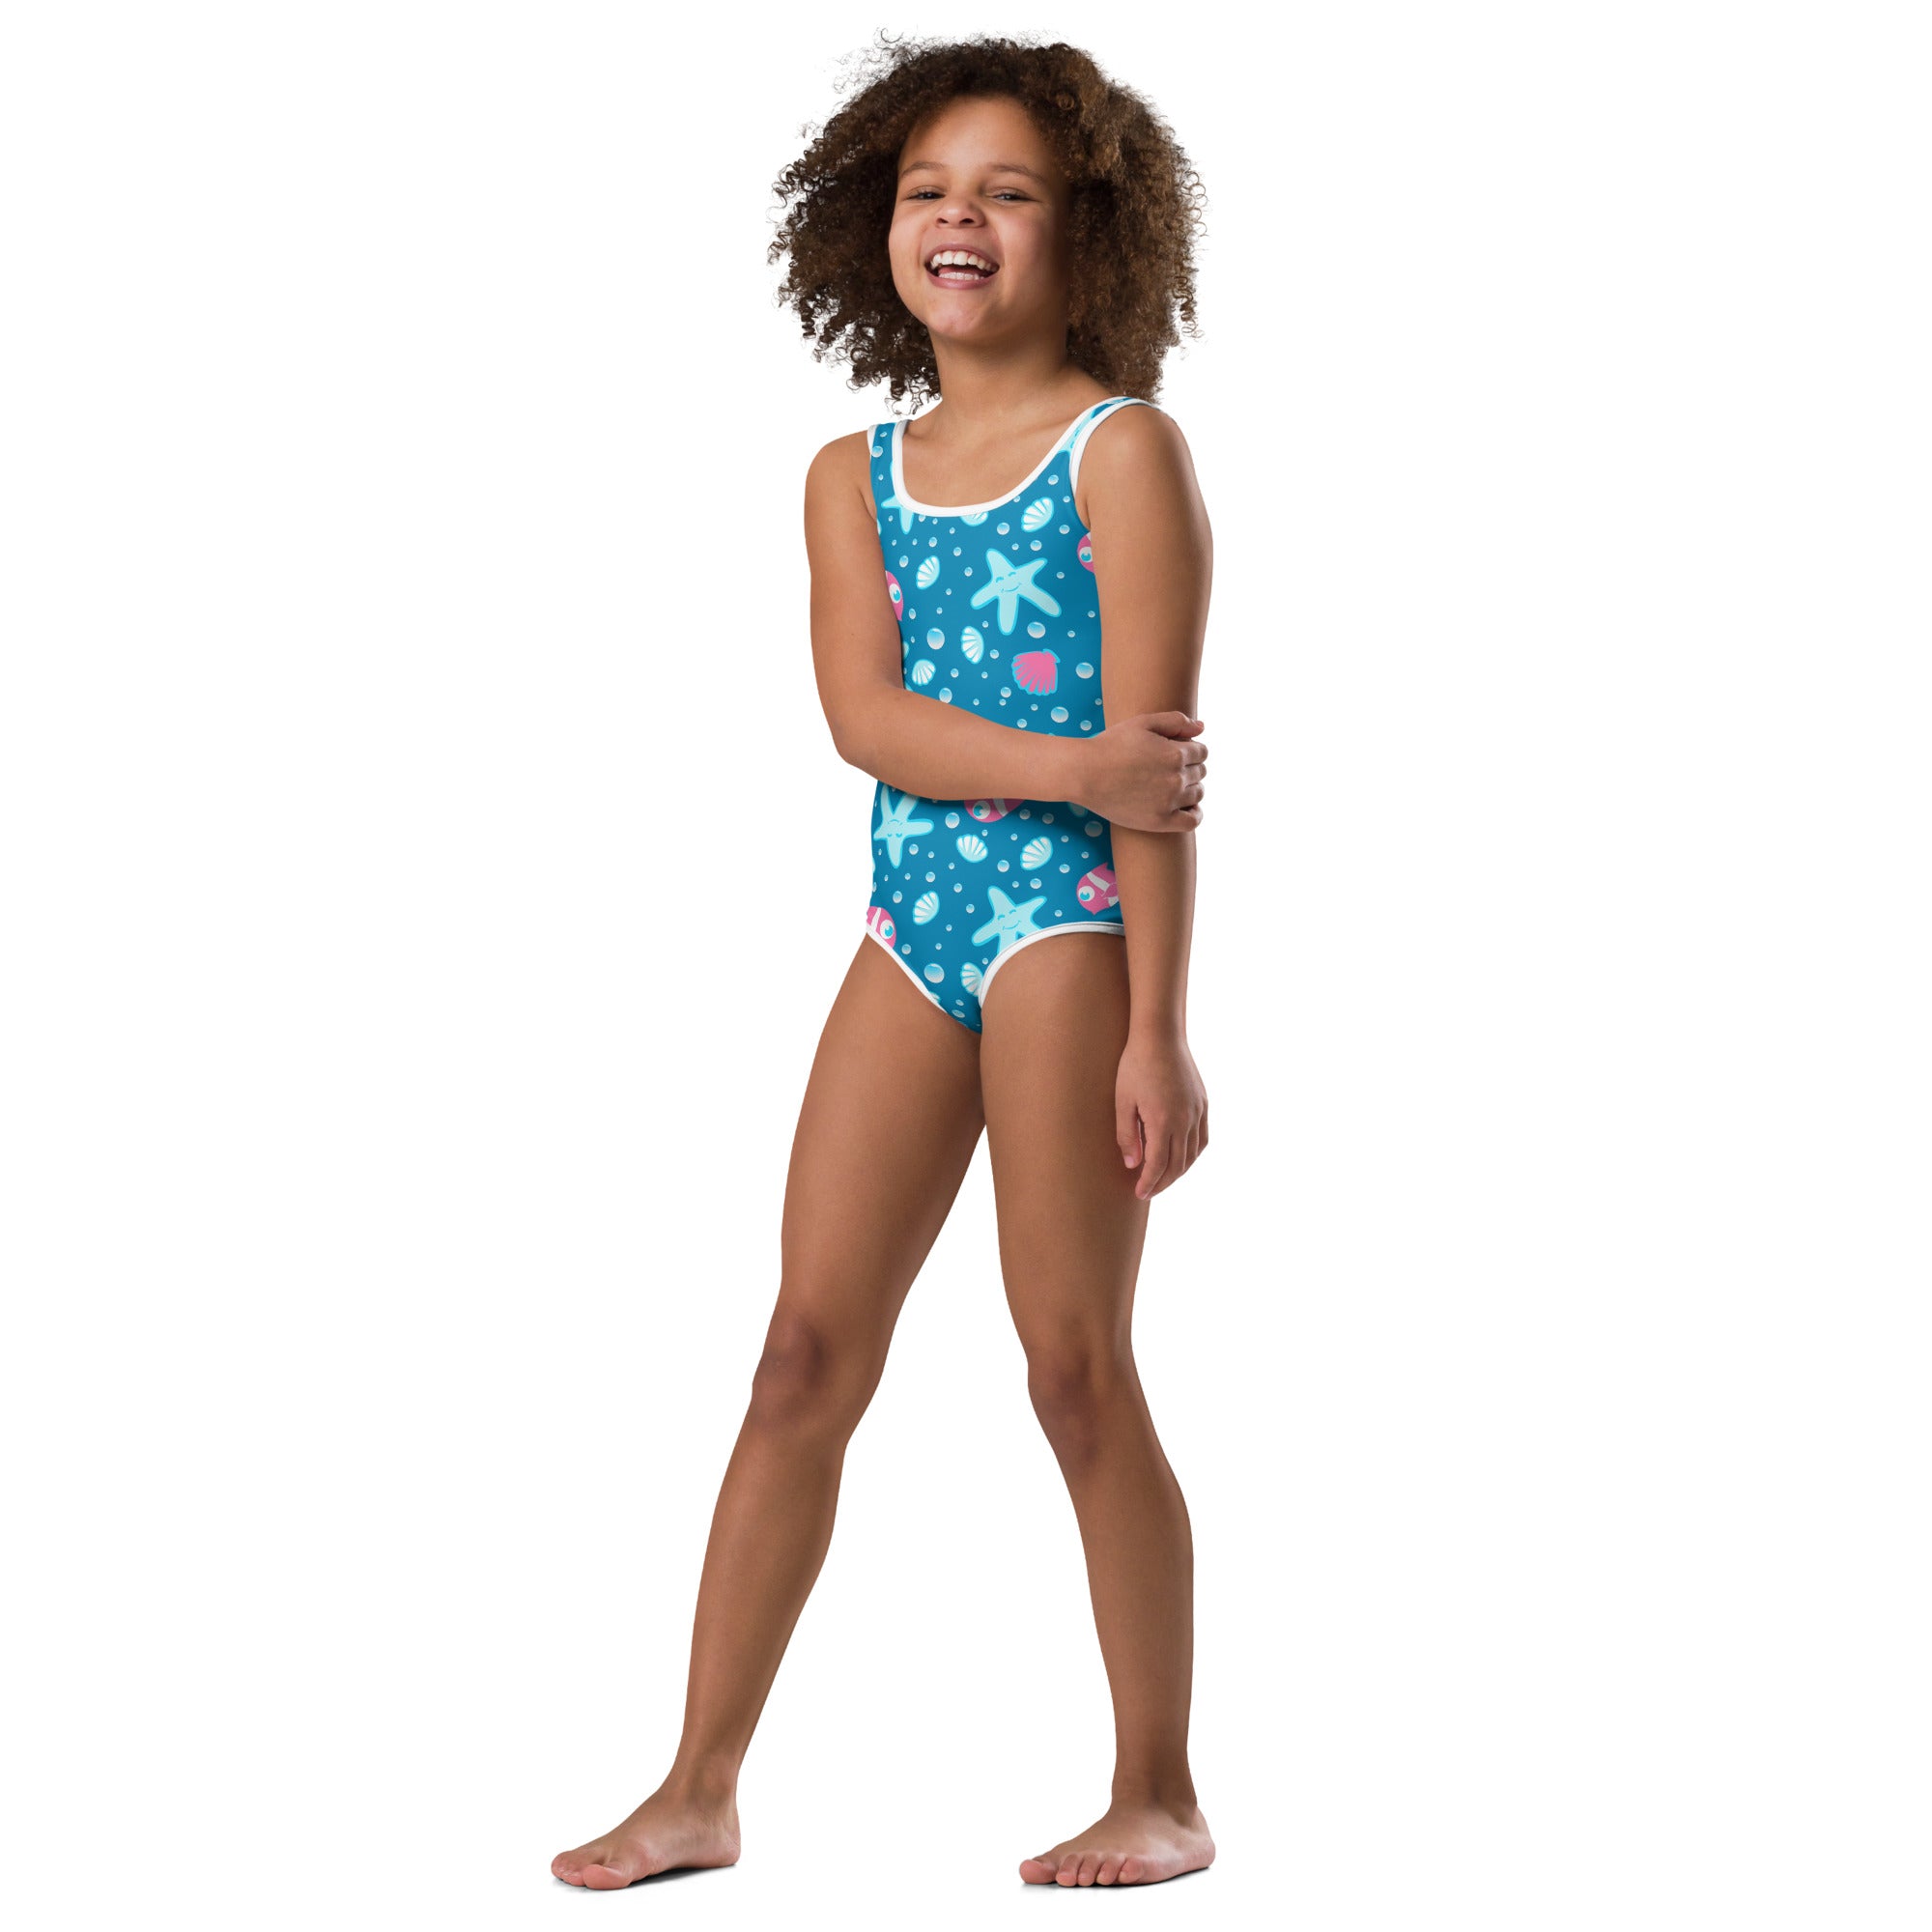 Kids' Printed One-Piece Swimsuit - Bubbles & Buddies